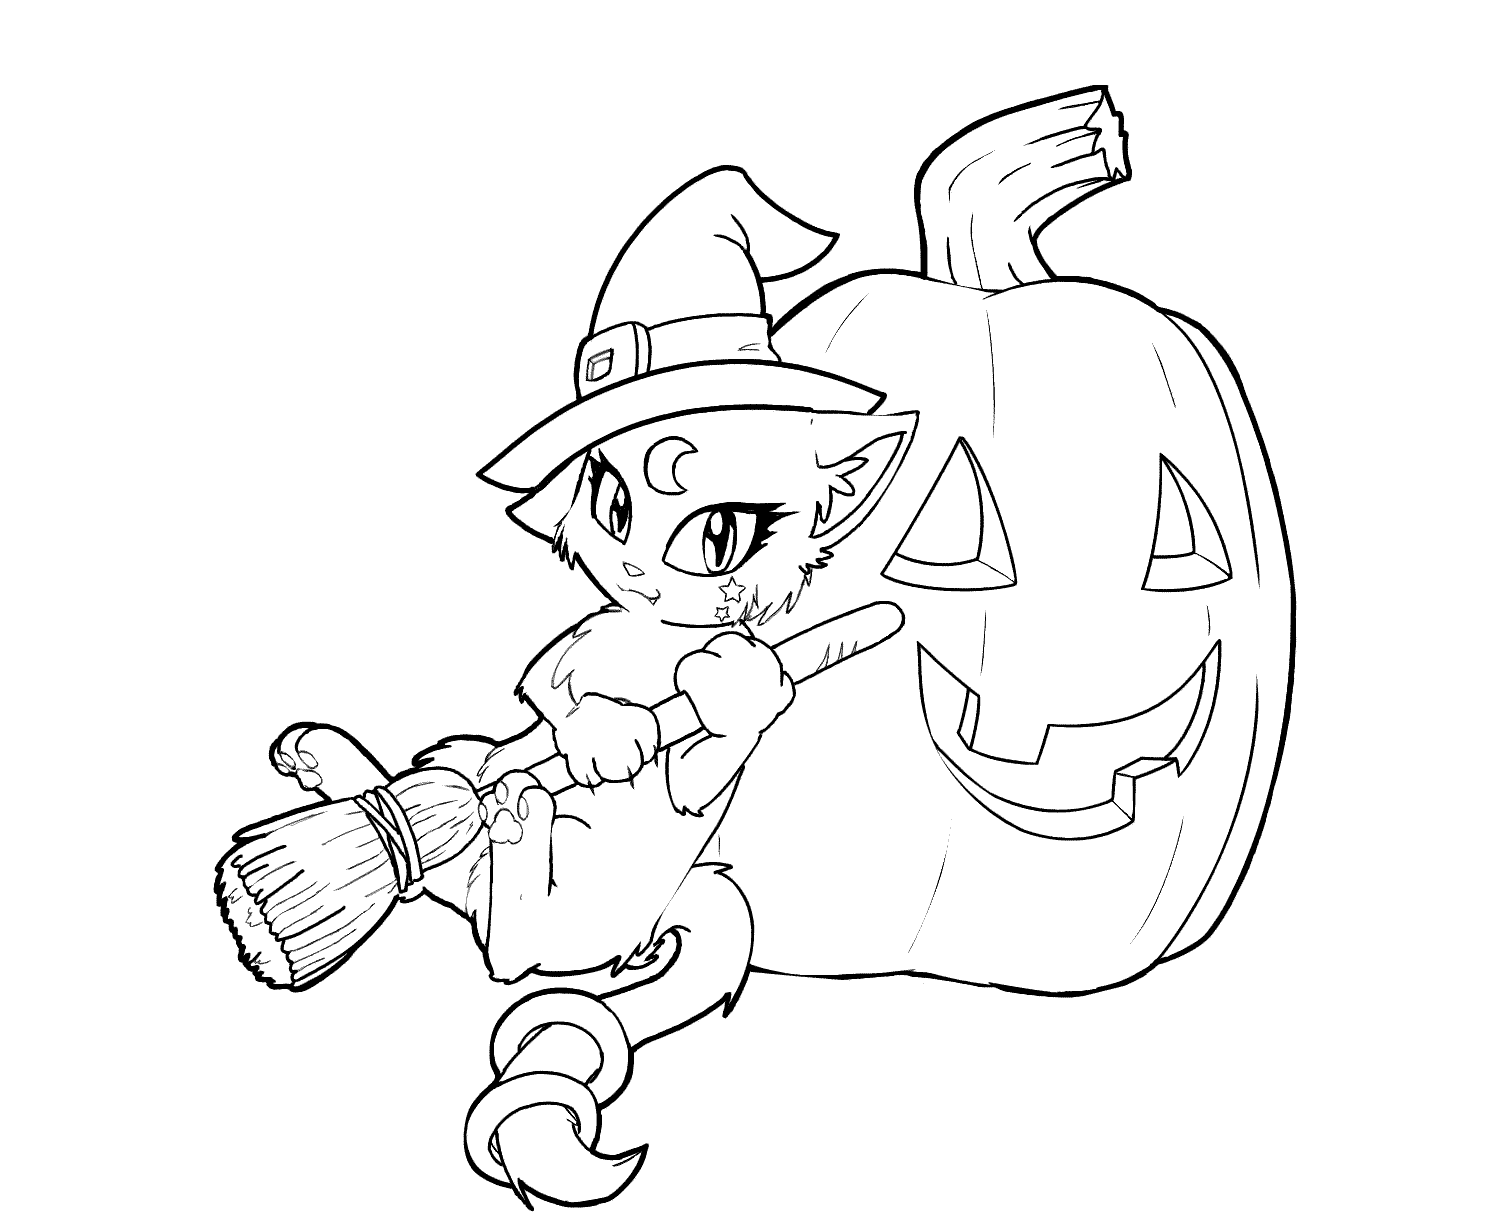 Halloween Pumpkin & Witch Cat with Magical Powers Coloring Page